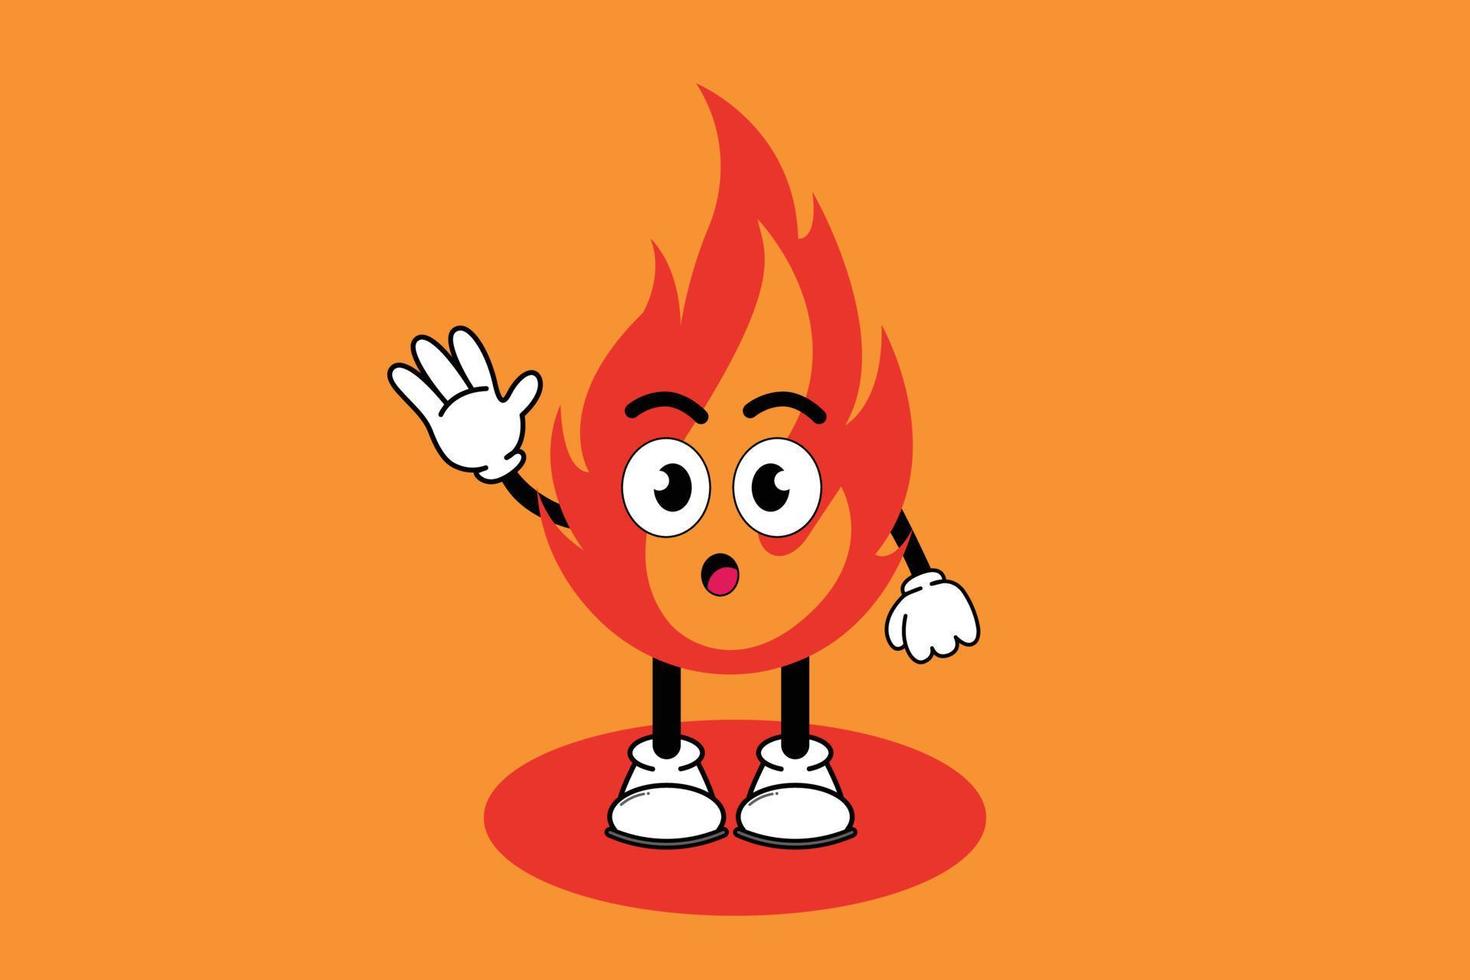 Illustration vector graphic cartoon character of cute mascot fire with pose. Suitable for children book illustration and element design.